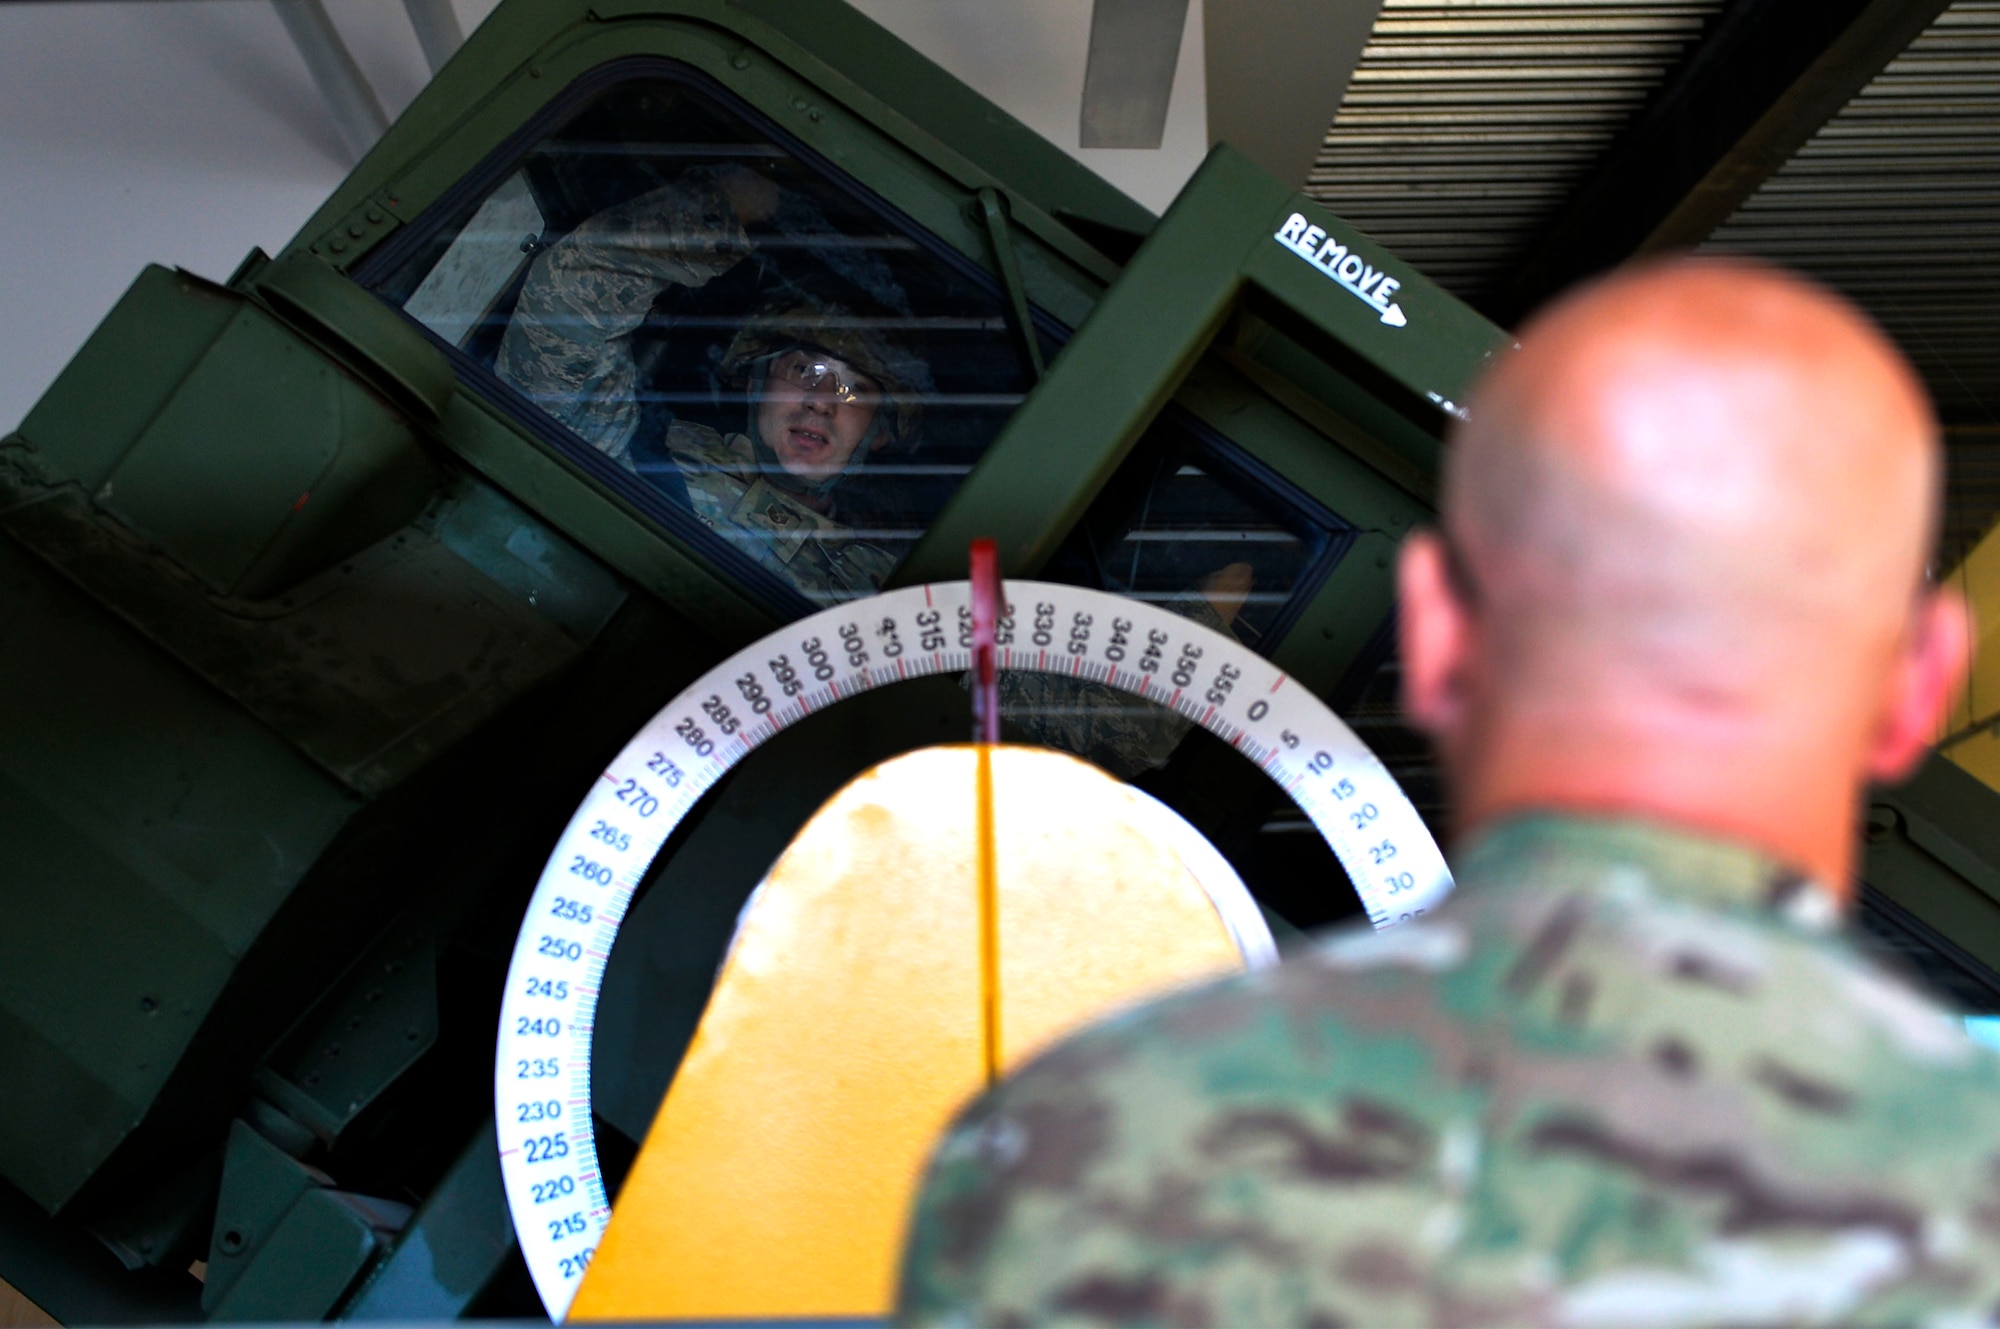 U.S. Air Force Master Sgt. Richard Koch, 7th Weather Squadron non-commissioned officer in charge of readiness, watches U.S. Air Force Staff Sgt. Dallas Rhodes, 7th WS unit deployment manager, undergo Humvee egress training on Lucius D. Clay Kaserne, Germany, June 14, 2017. The 7th WS regularly trains its Airmen in Soldier common tasks. Army weather support Airmen regularly participate in field operations with the U.S. Army. (U.S. Air Force photo by Airman 1st Class Joshua Magbanua)